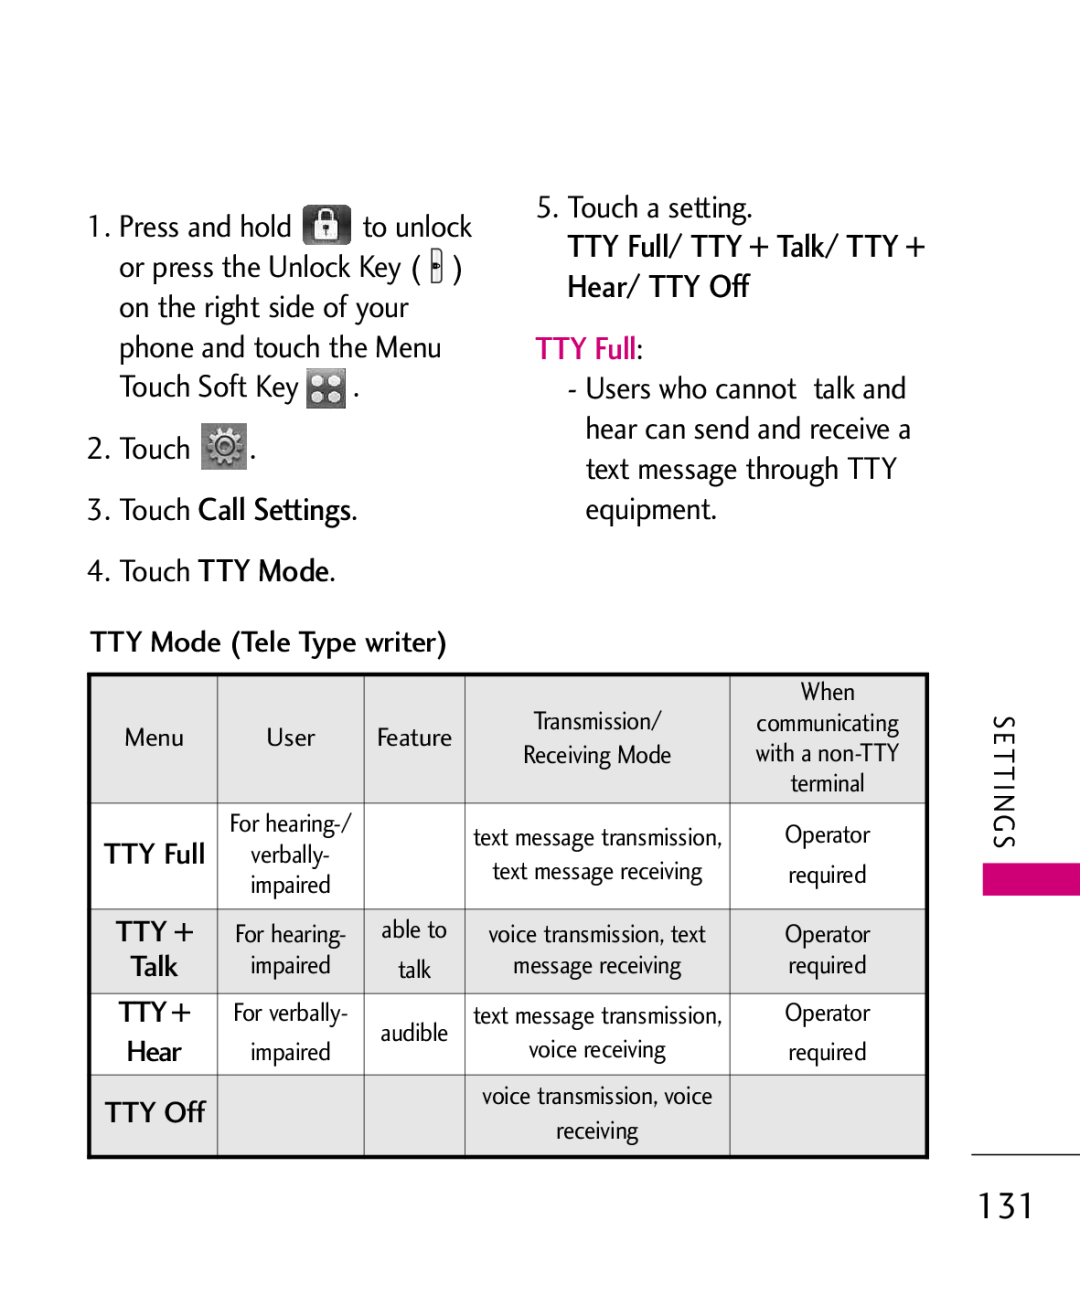 LG Electronics MMBB0379501 manual Touch Call Settings 4. Touch TTY Mode, TTY Full/ TTY + Talk/ TTY + Hear/ TTY Off 